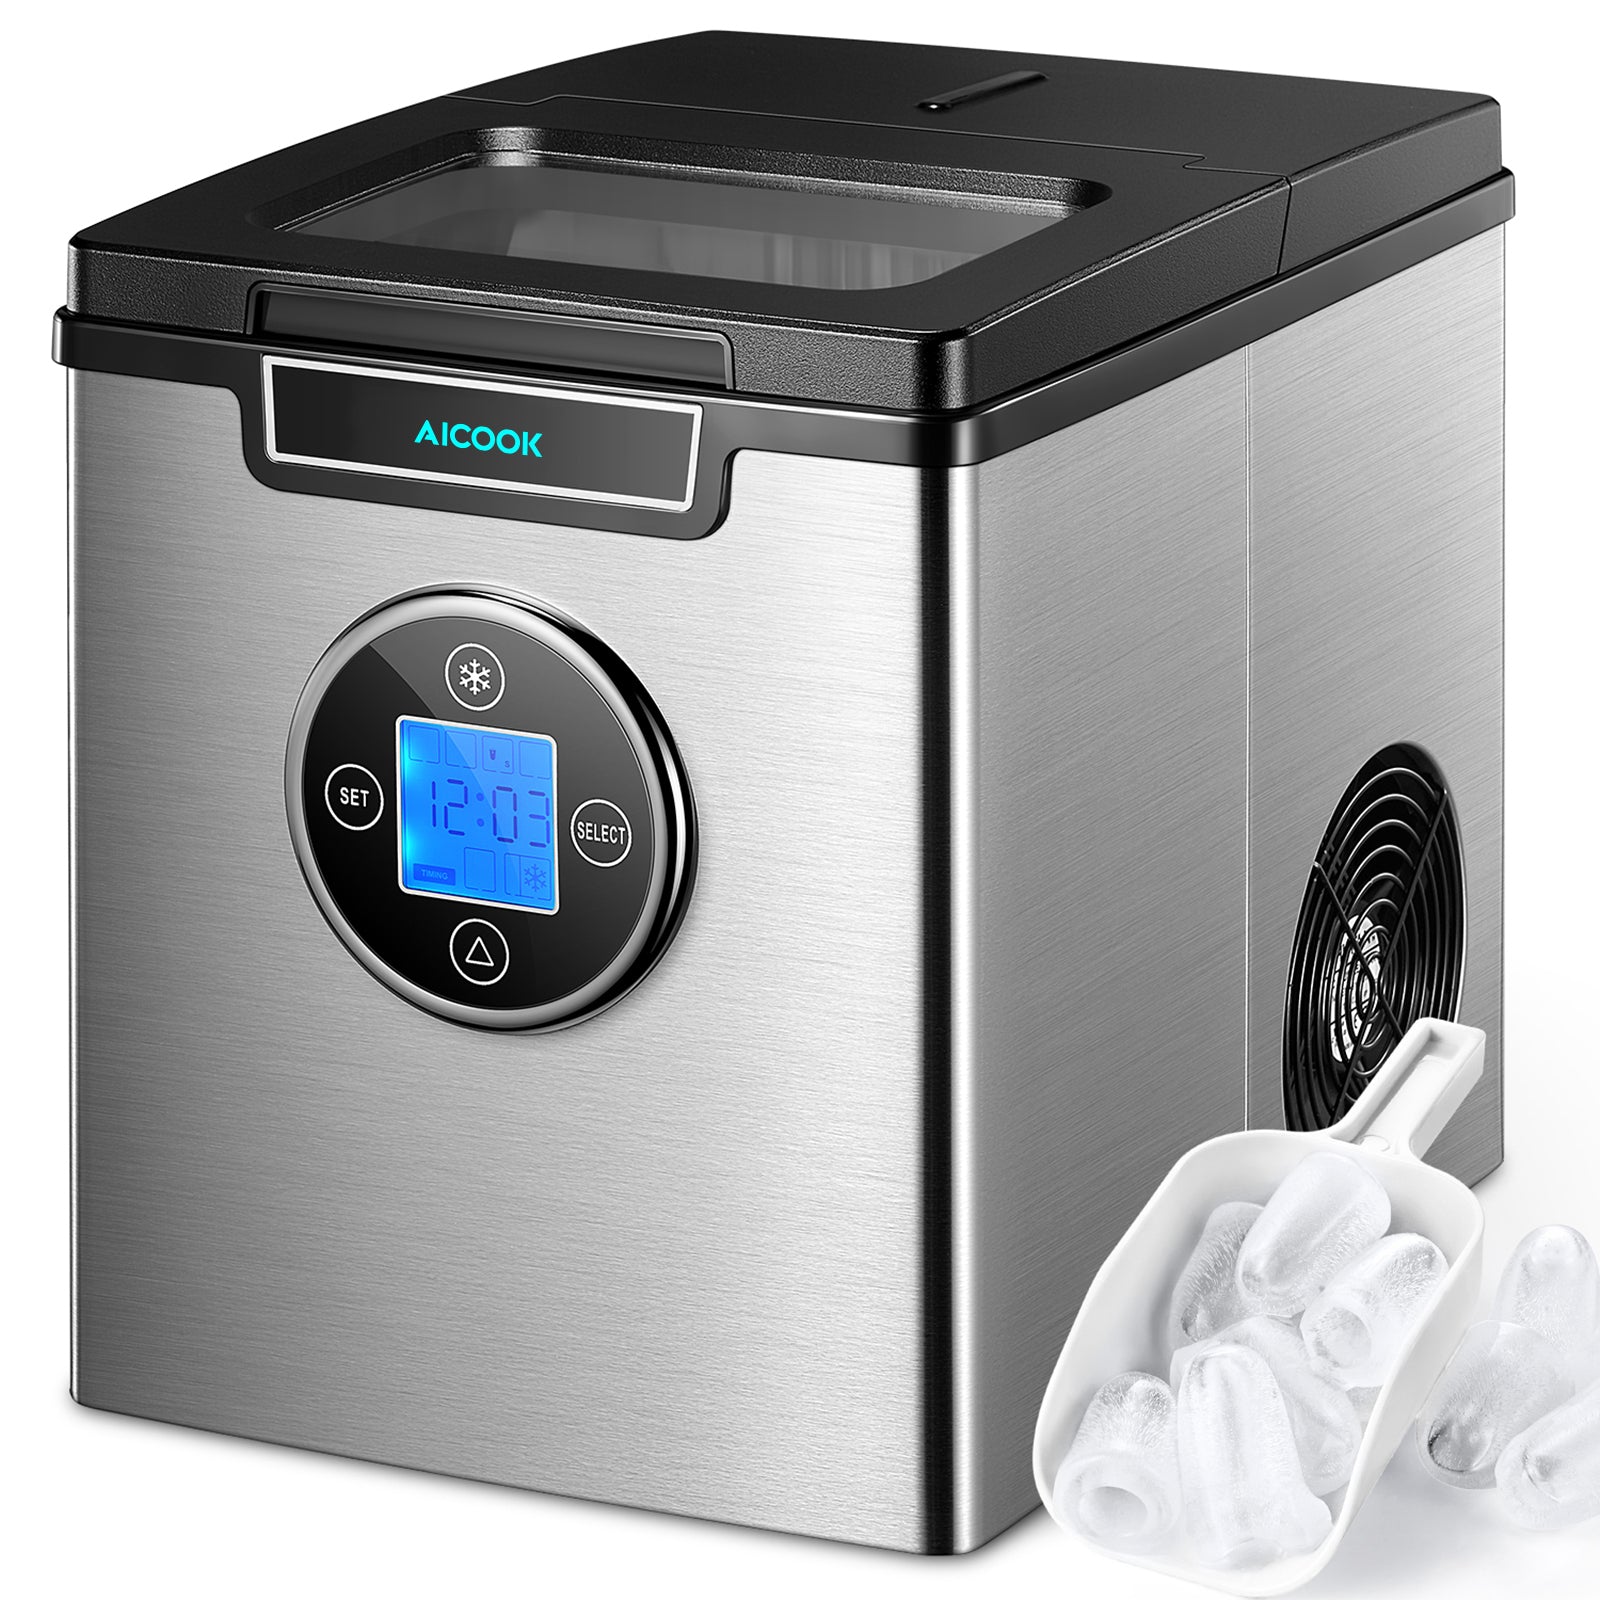 AICOOK Ice Maker Countertop Stainless Steel, 28 lbs. in 24 Hours, 9 Cubes Ready in 6 Minutes, 3 Ice Sizes, 2.4L with LED Display, Self Cleaning Function, Quiet Ice Maker Machine with Timer, Scoop and Basket